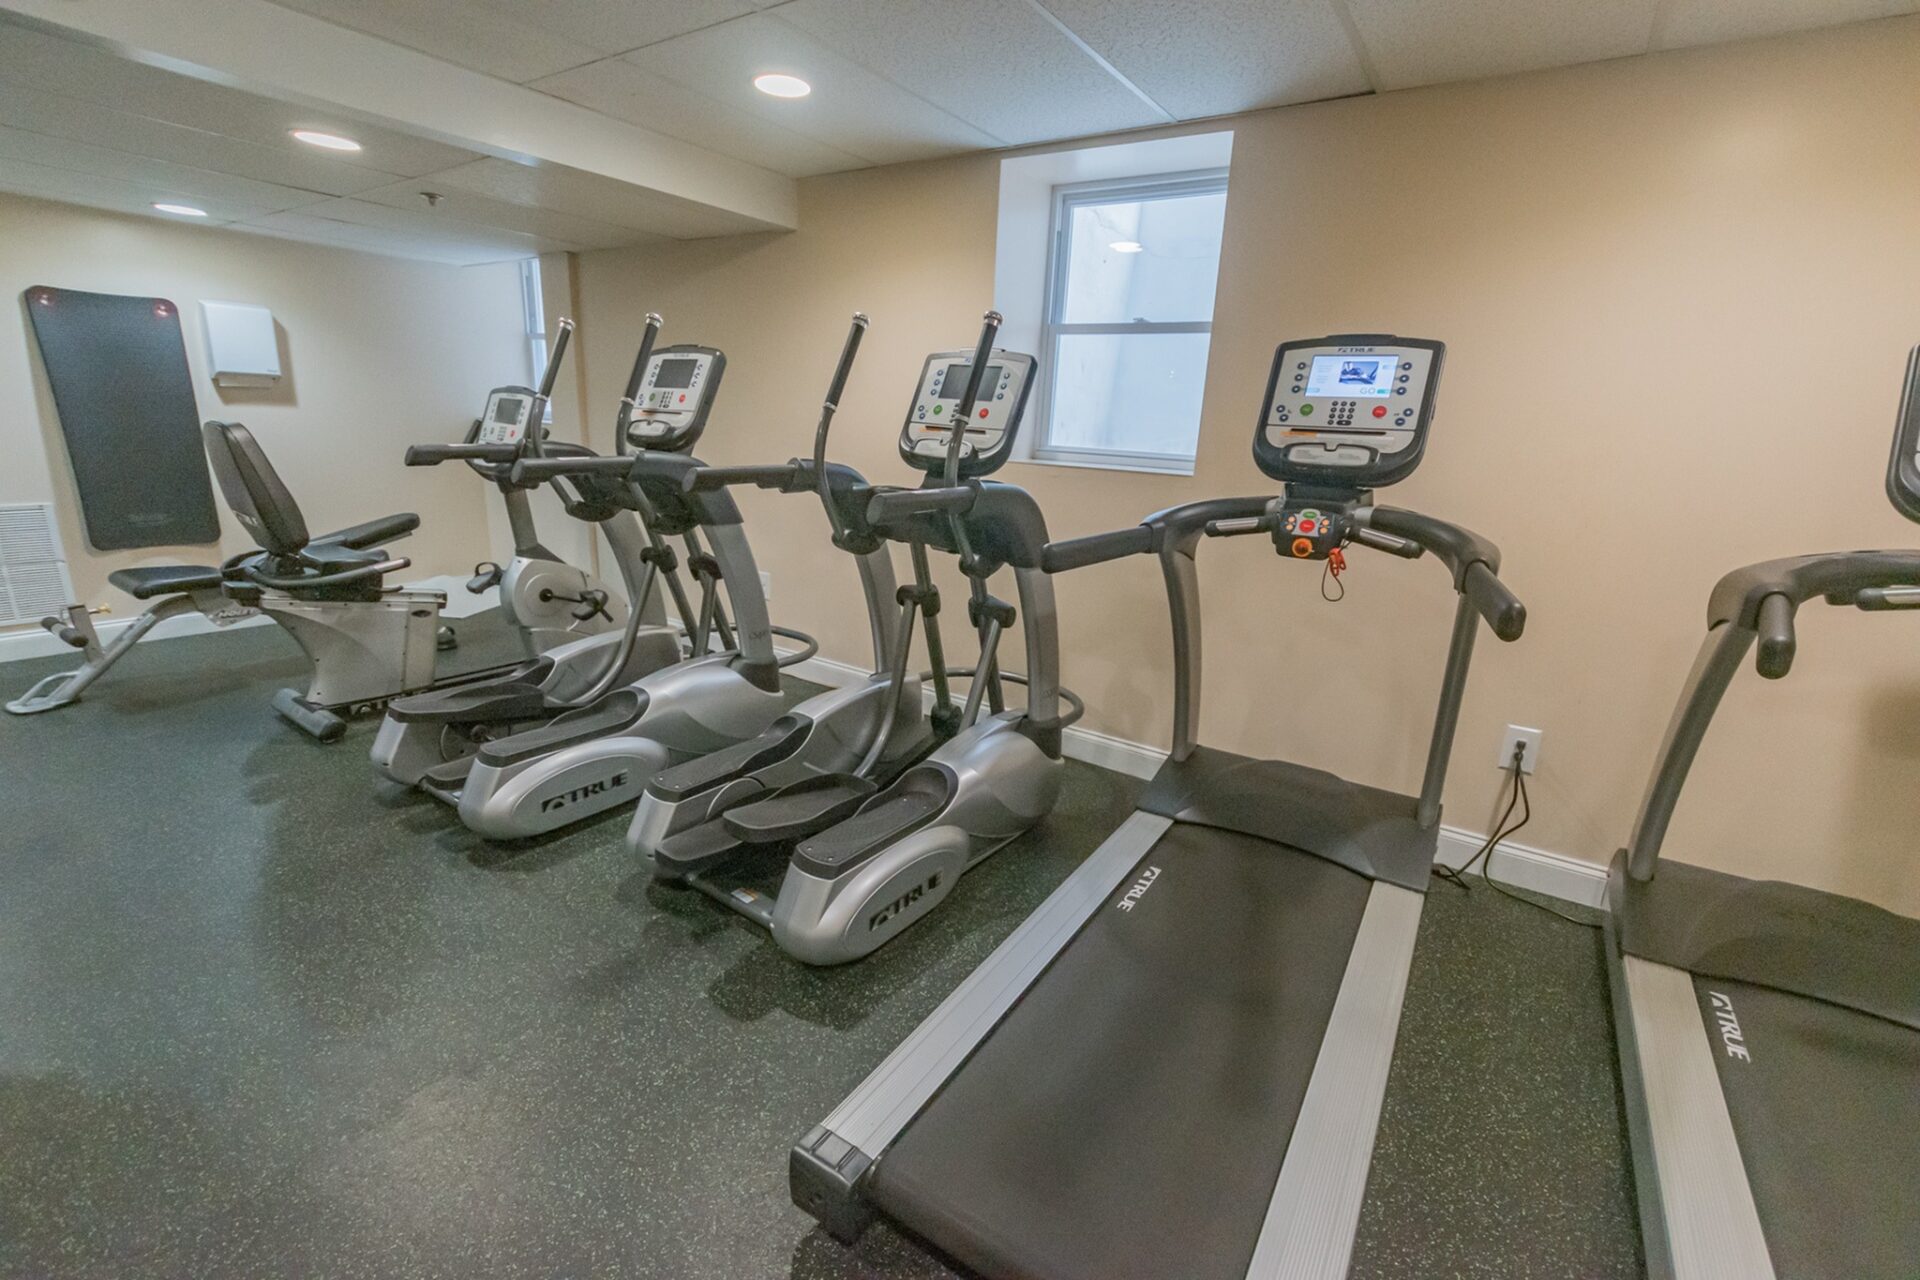 Suburban Court fitness center with workout equipment